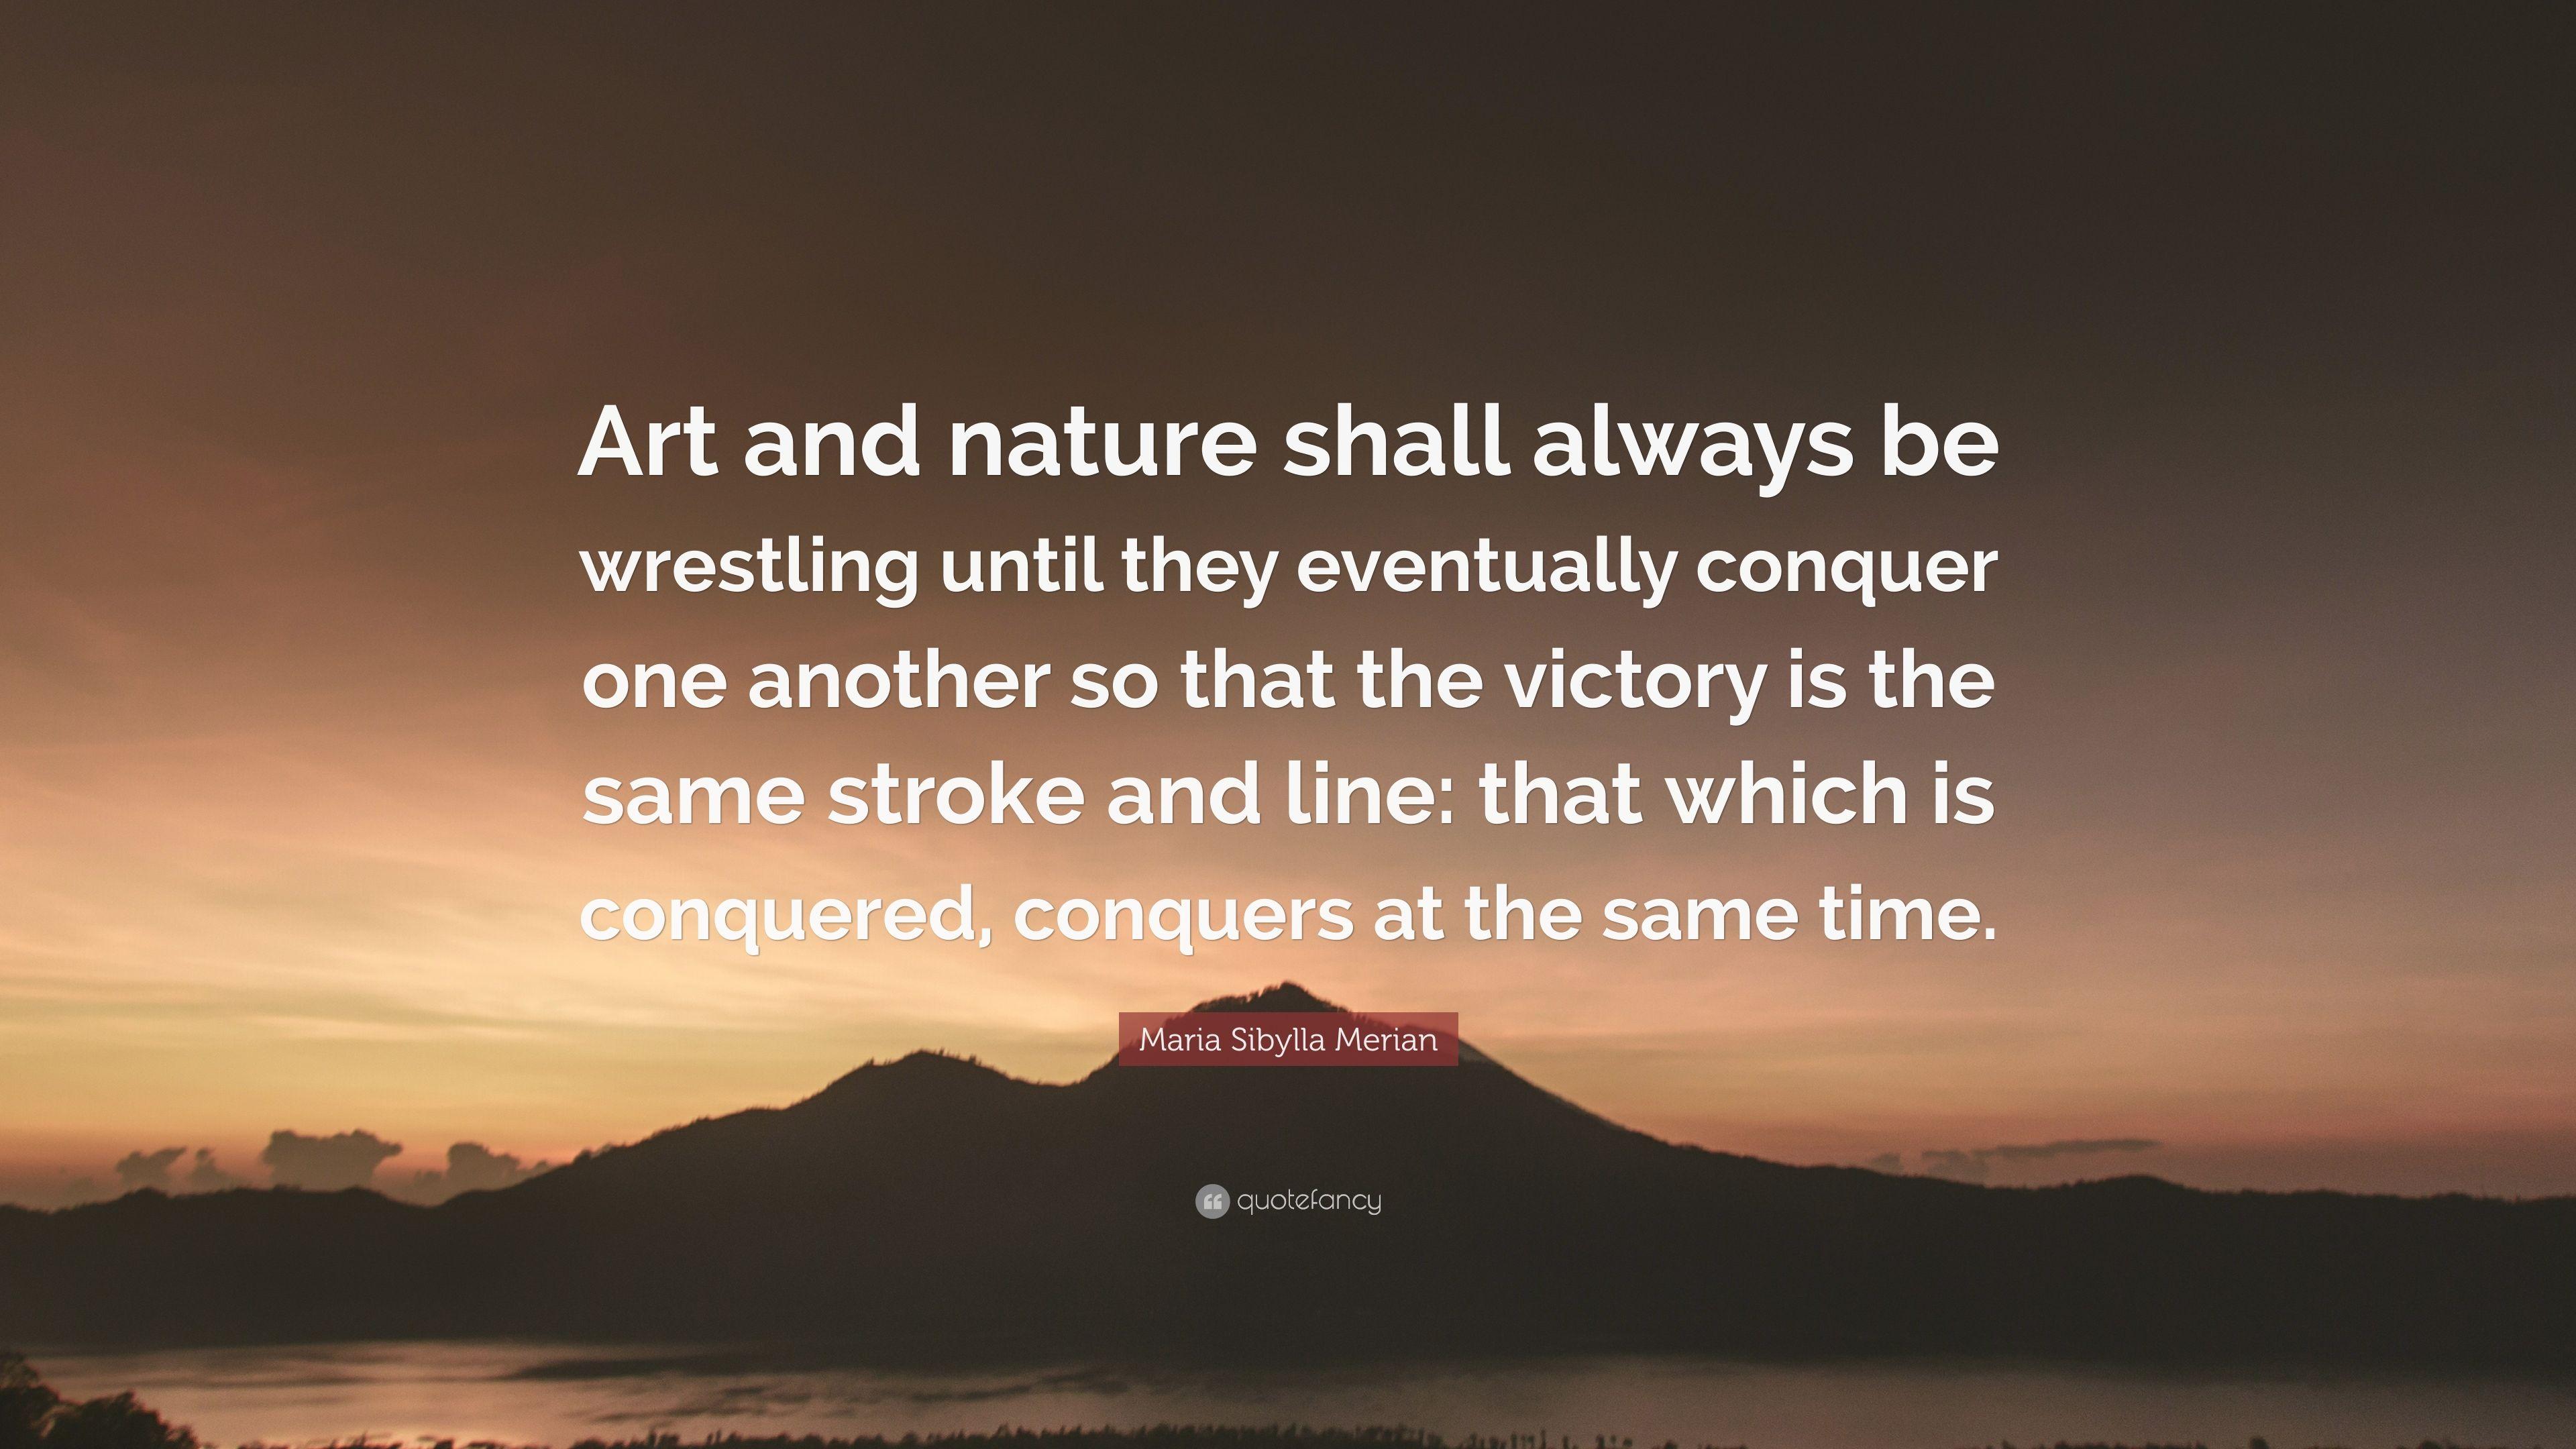 Maria Sibylla Merian Quote: “Art and nature shall always be